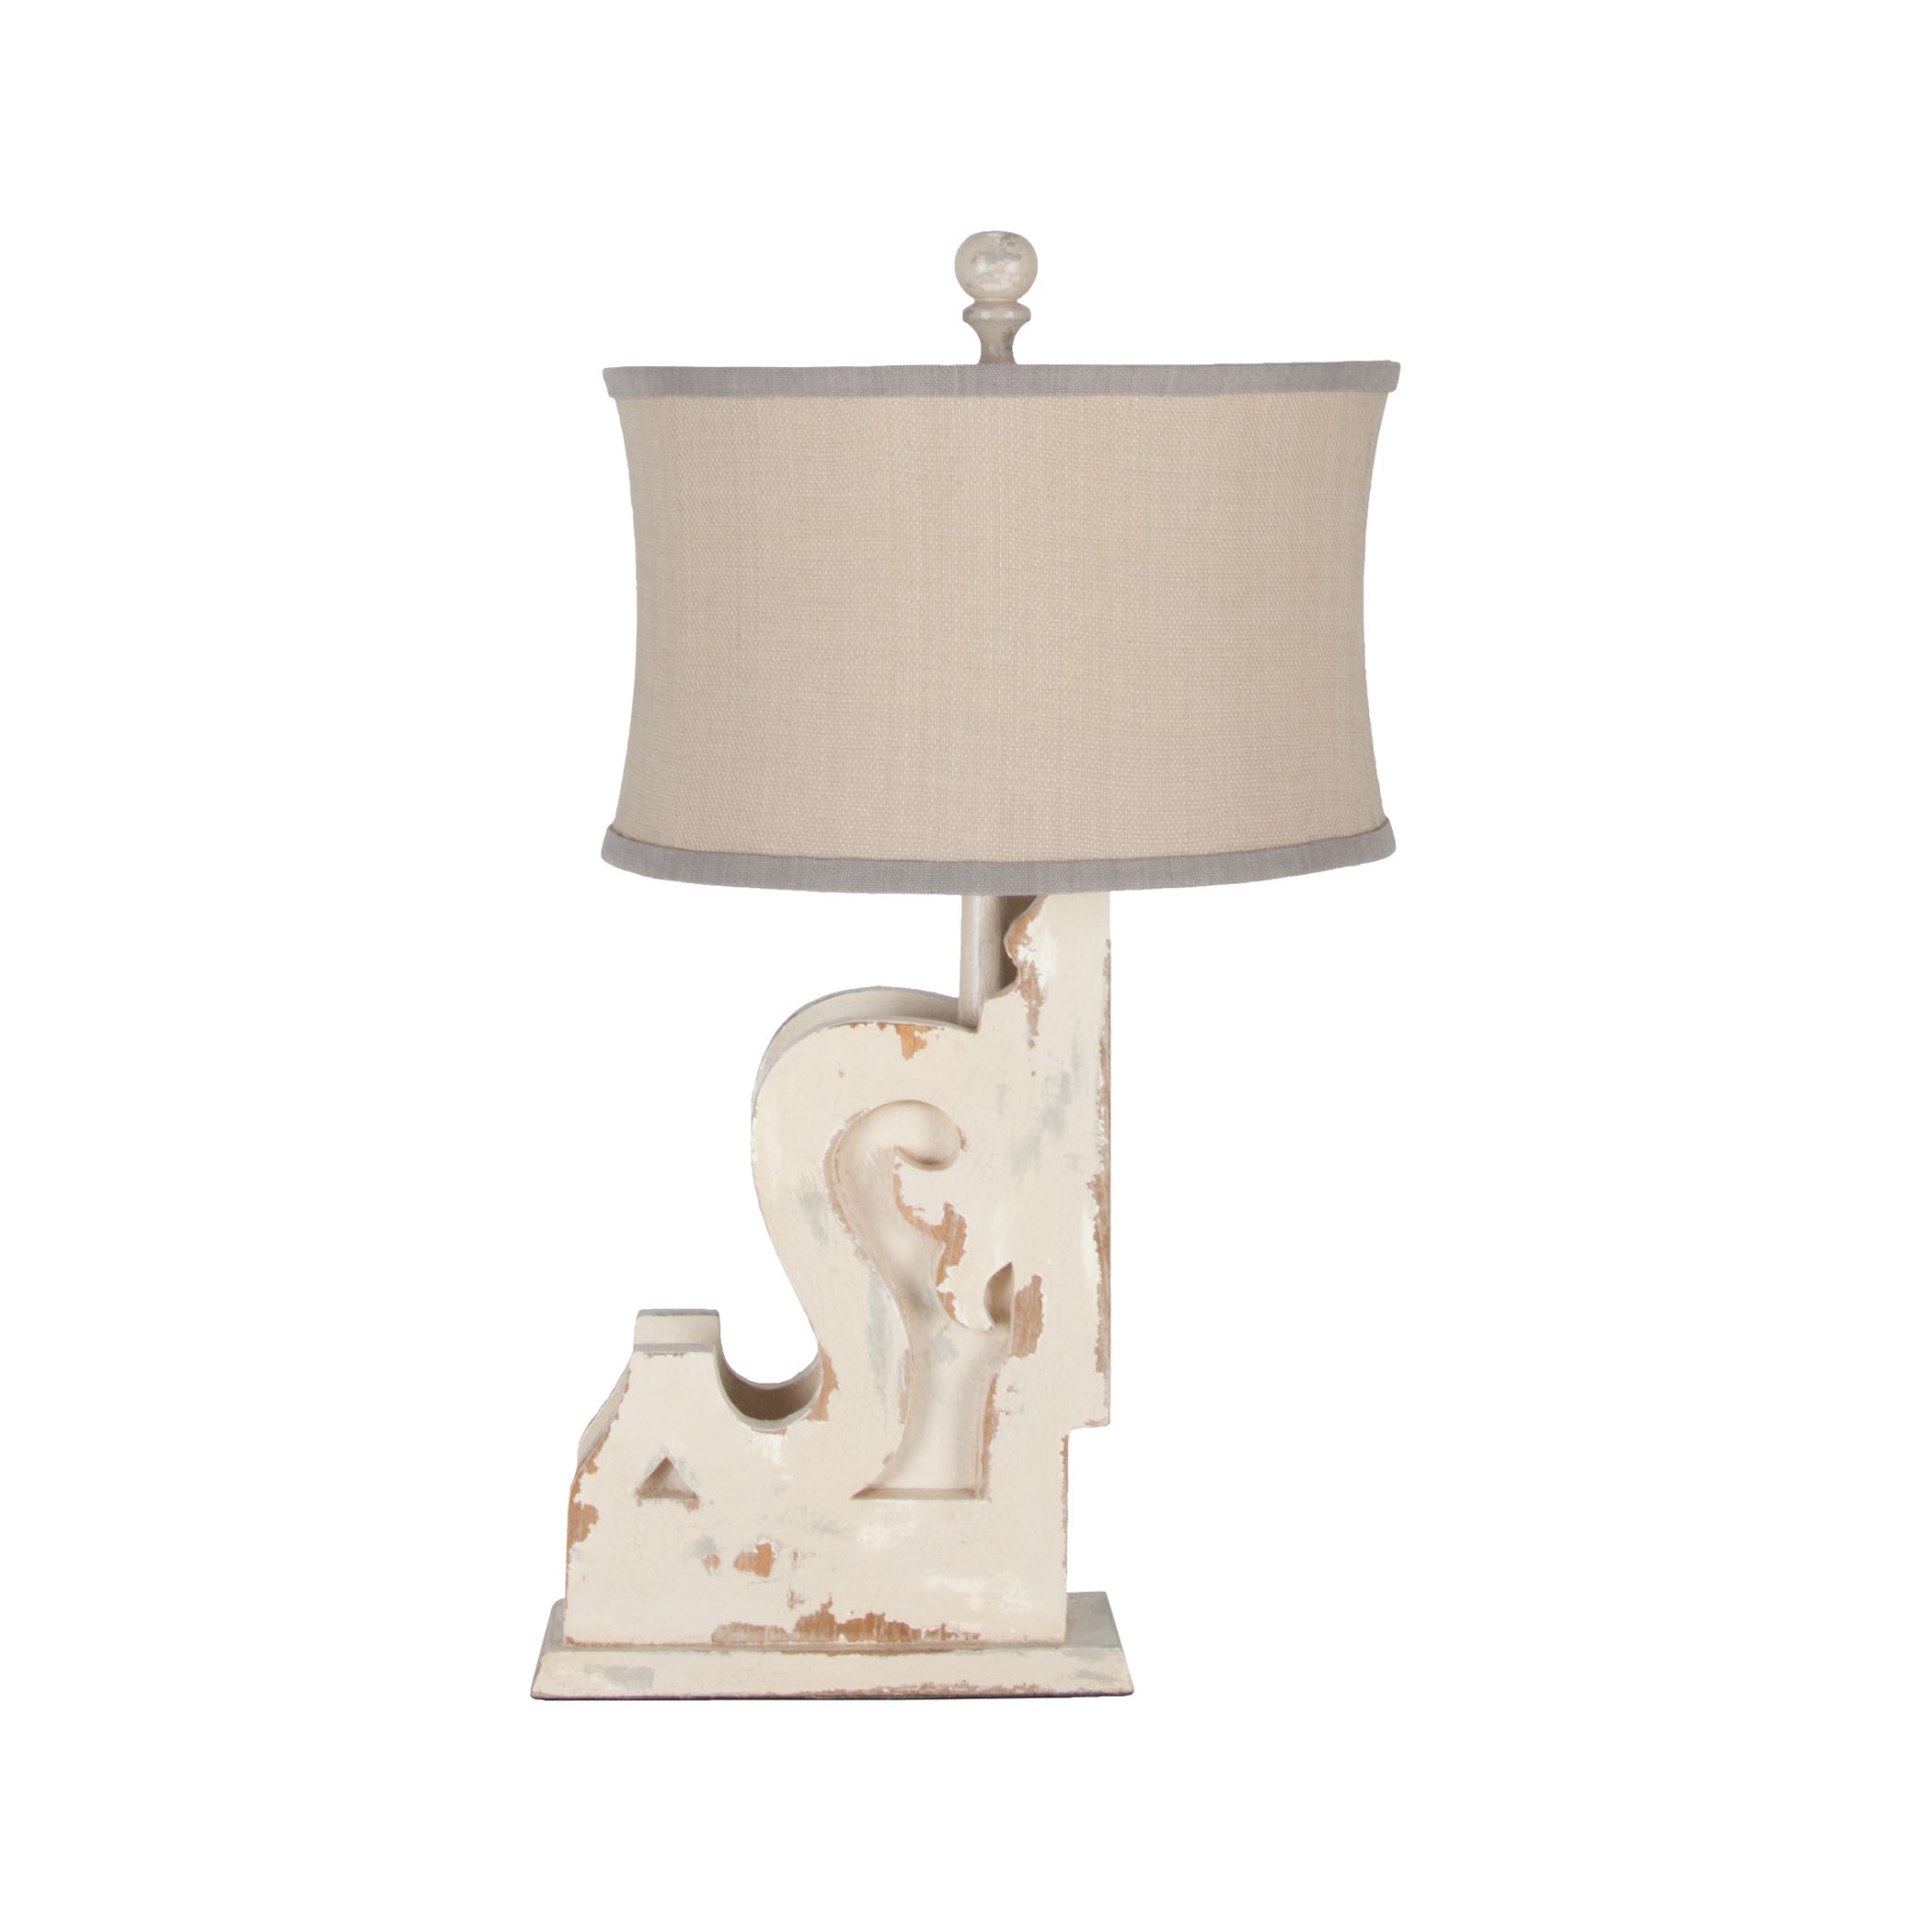 Guildmaster Gui-3516023 Carved Corbel Collection Crossroads Rosa Finish Table Lamp